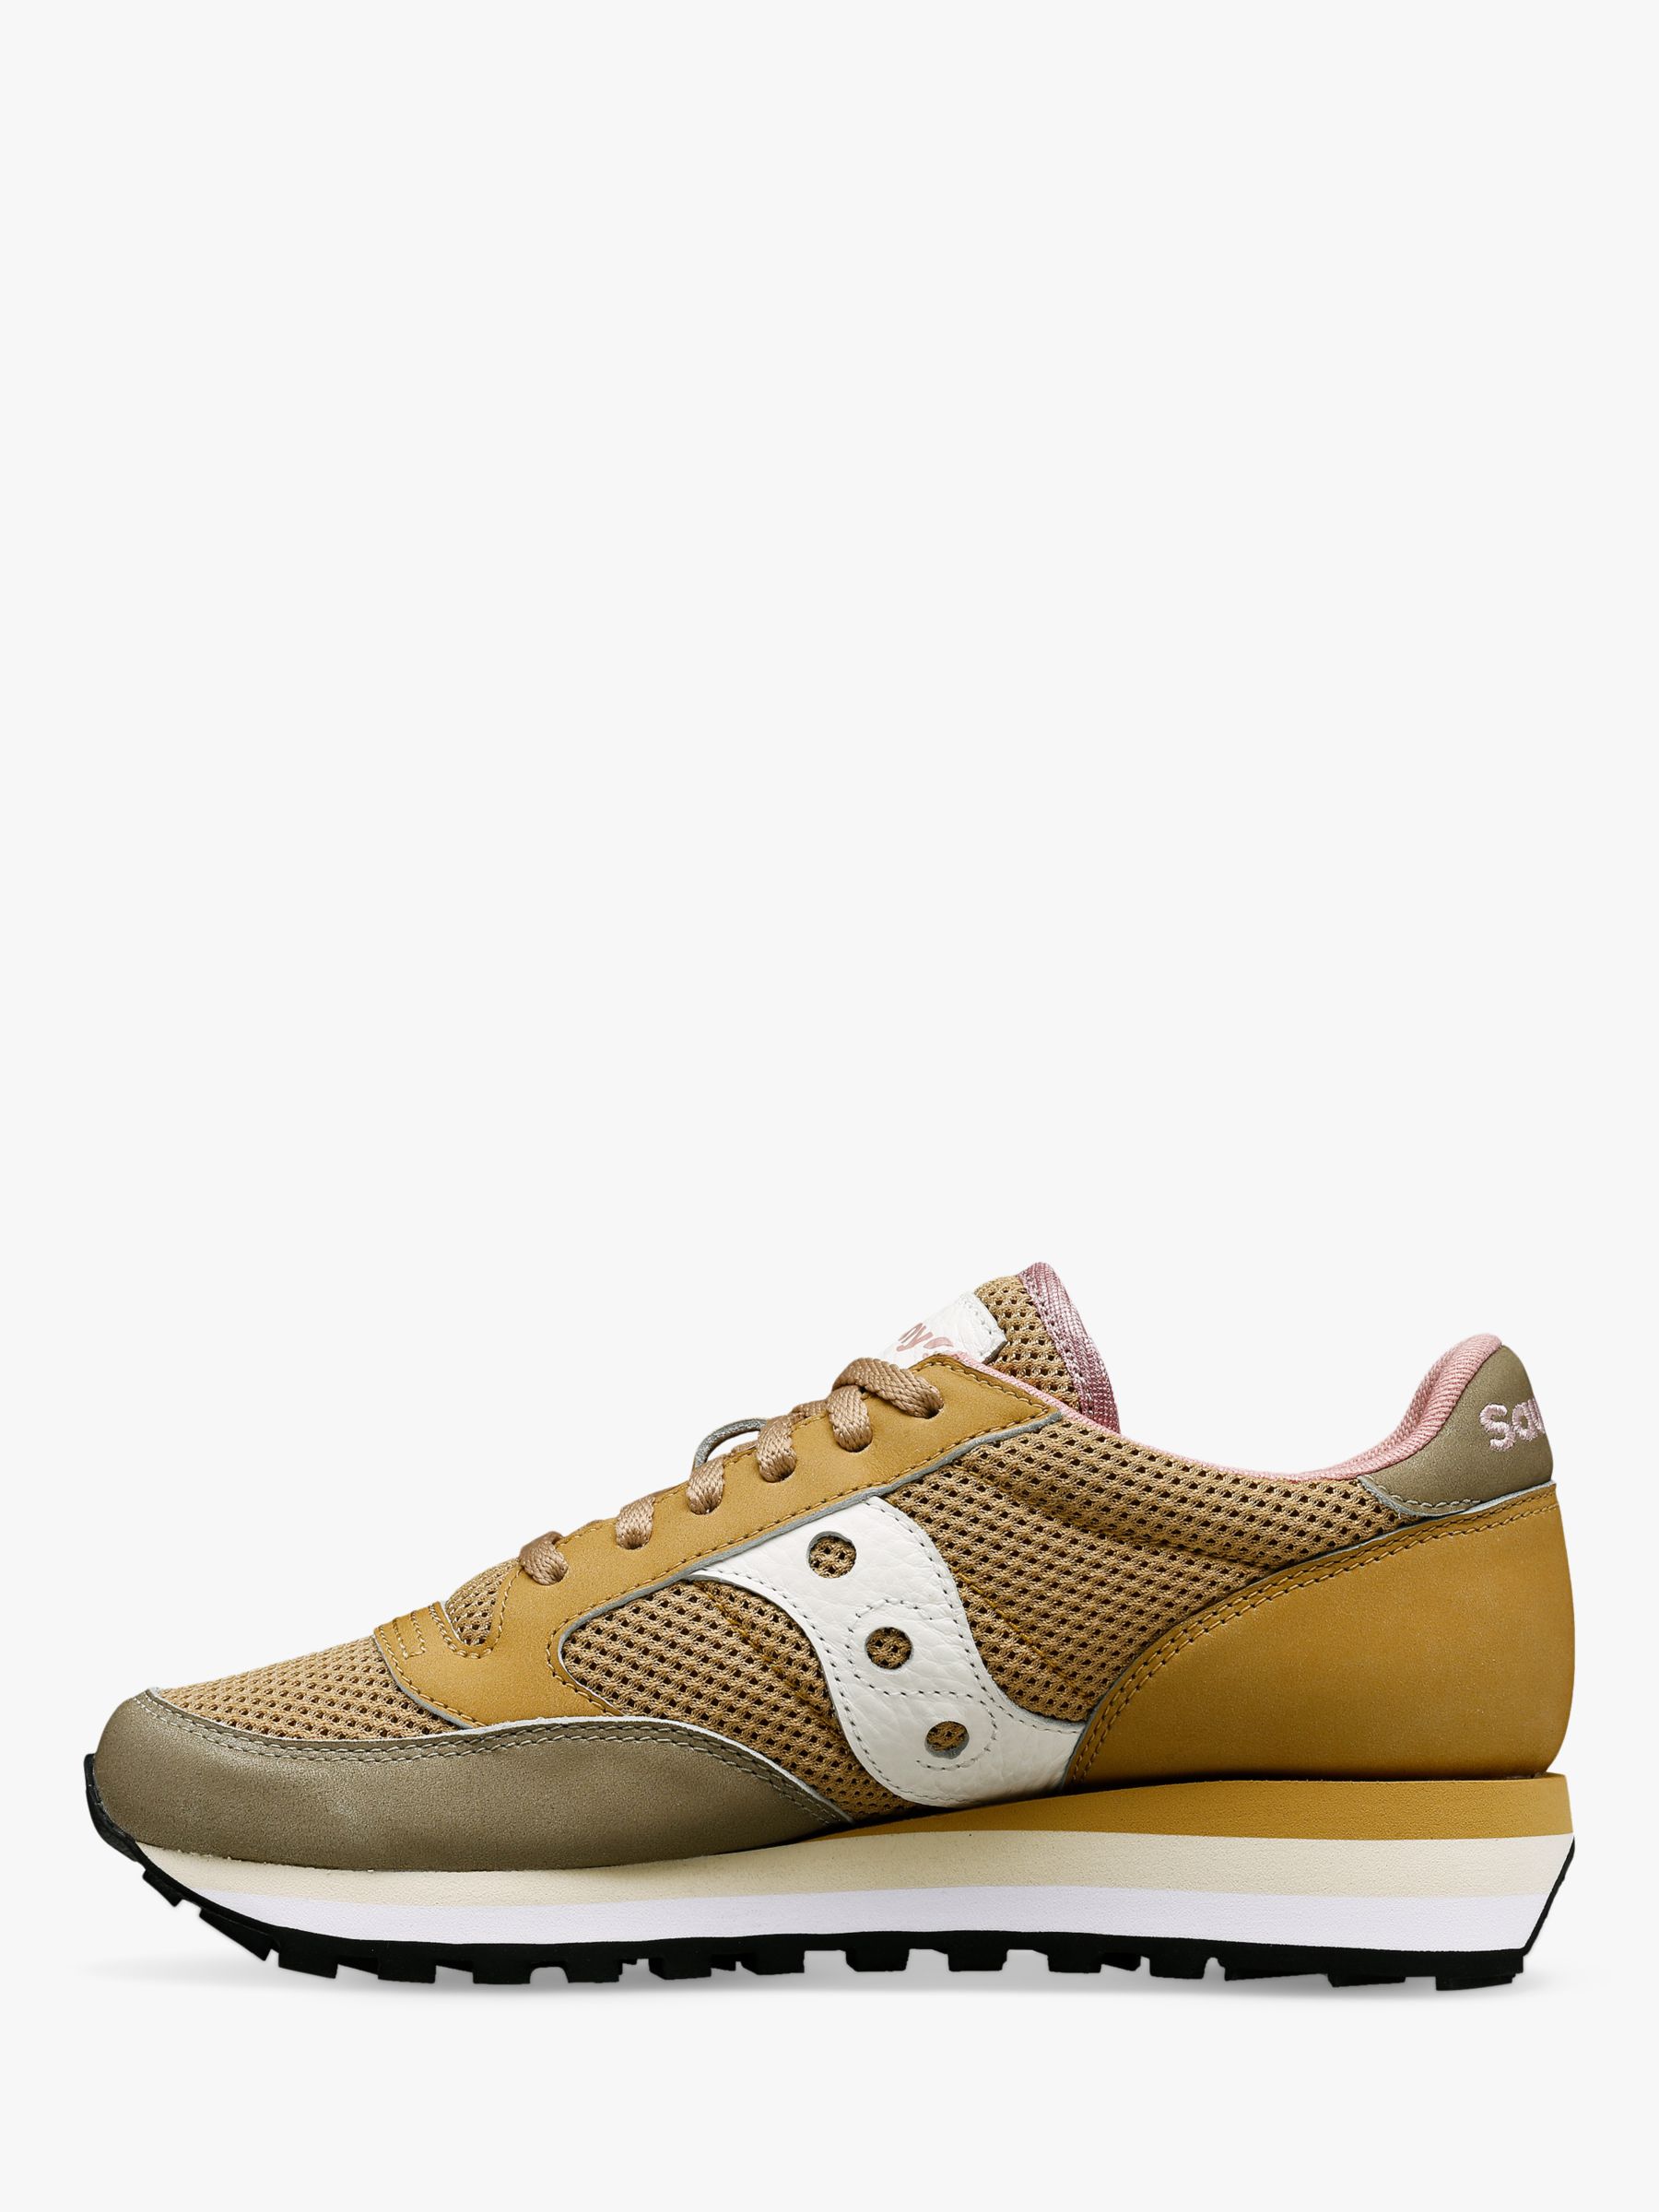 Buy Saucony Jazz Triple Mesh Leather Blend Trainers Online at johnlewis.com